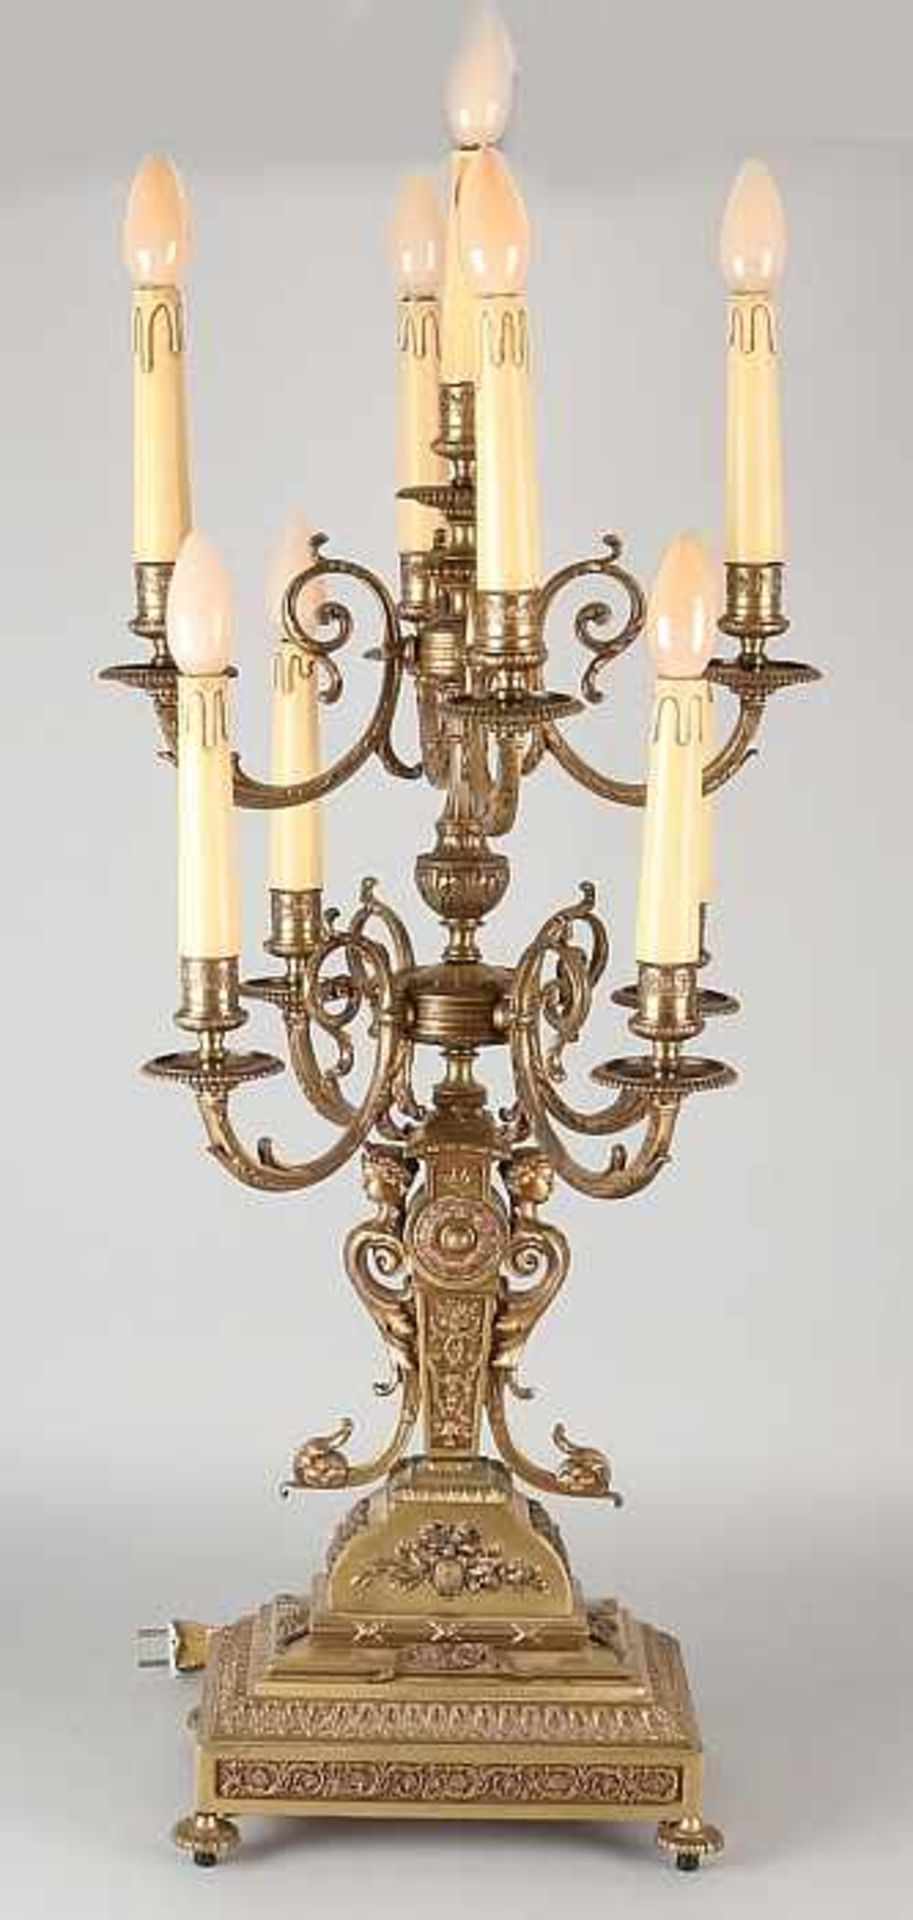 Capital historicism bronze table lamp with bird heads and vines. Dimensions: H 100 cm. In good